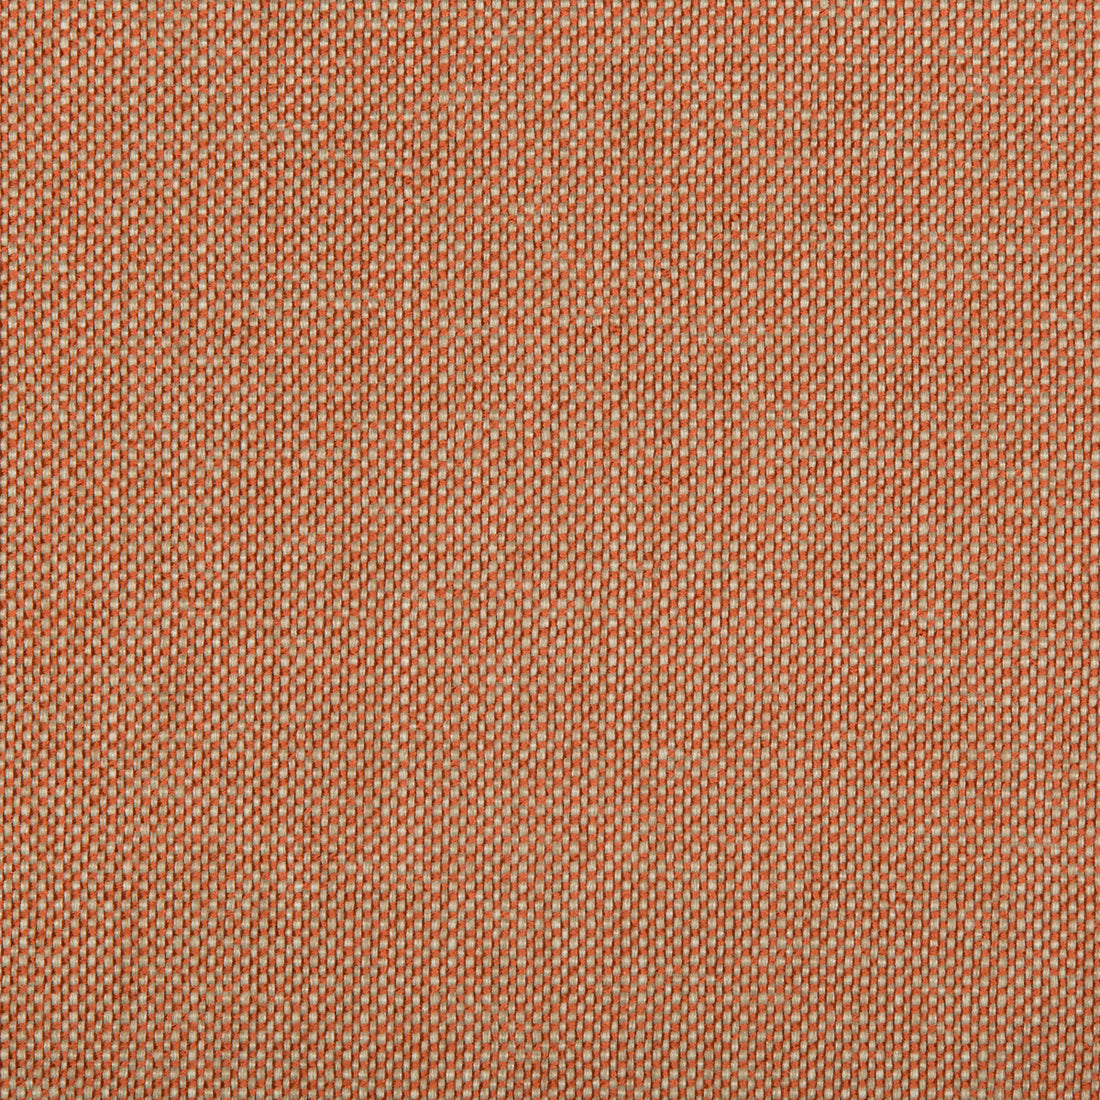 Williams fabric in necture color - pattern 35744.12.0 - by Kravet Contract in the Value Kravetarmor collection